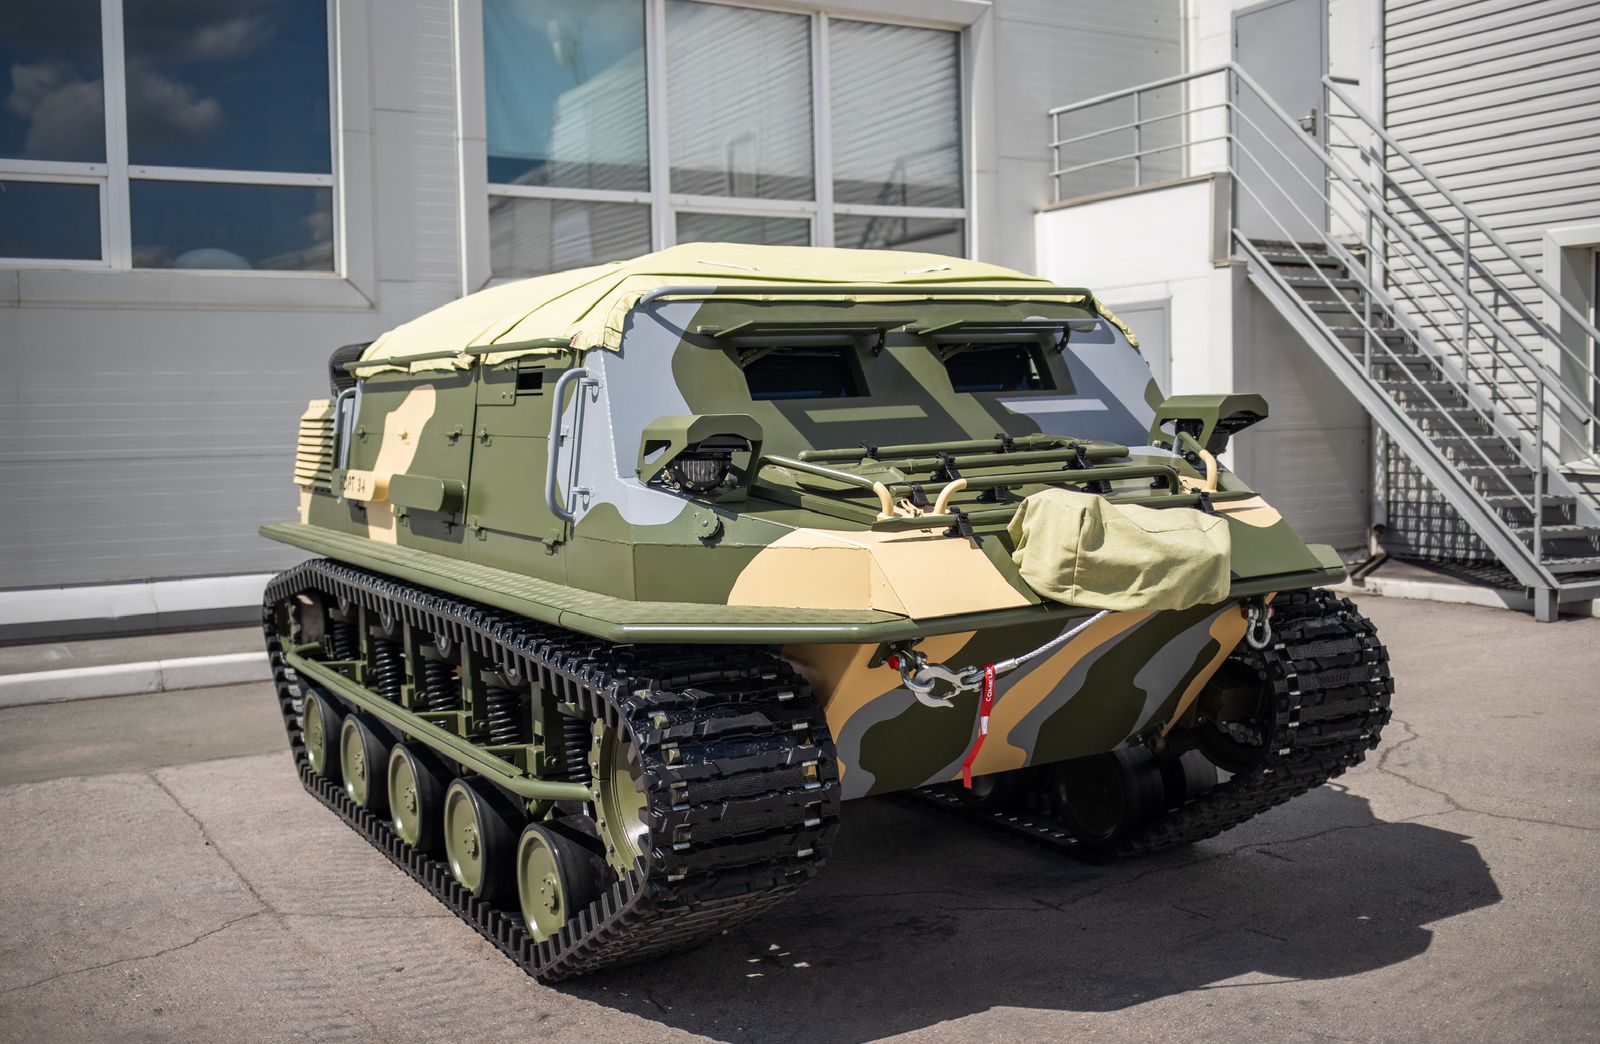 Russian ground forces receive first test batches of Plaston multi-purpose armored vehicles